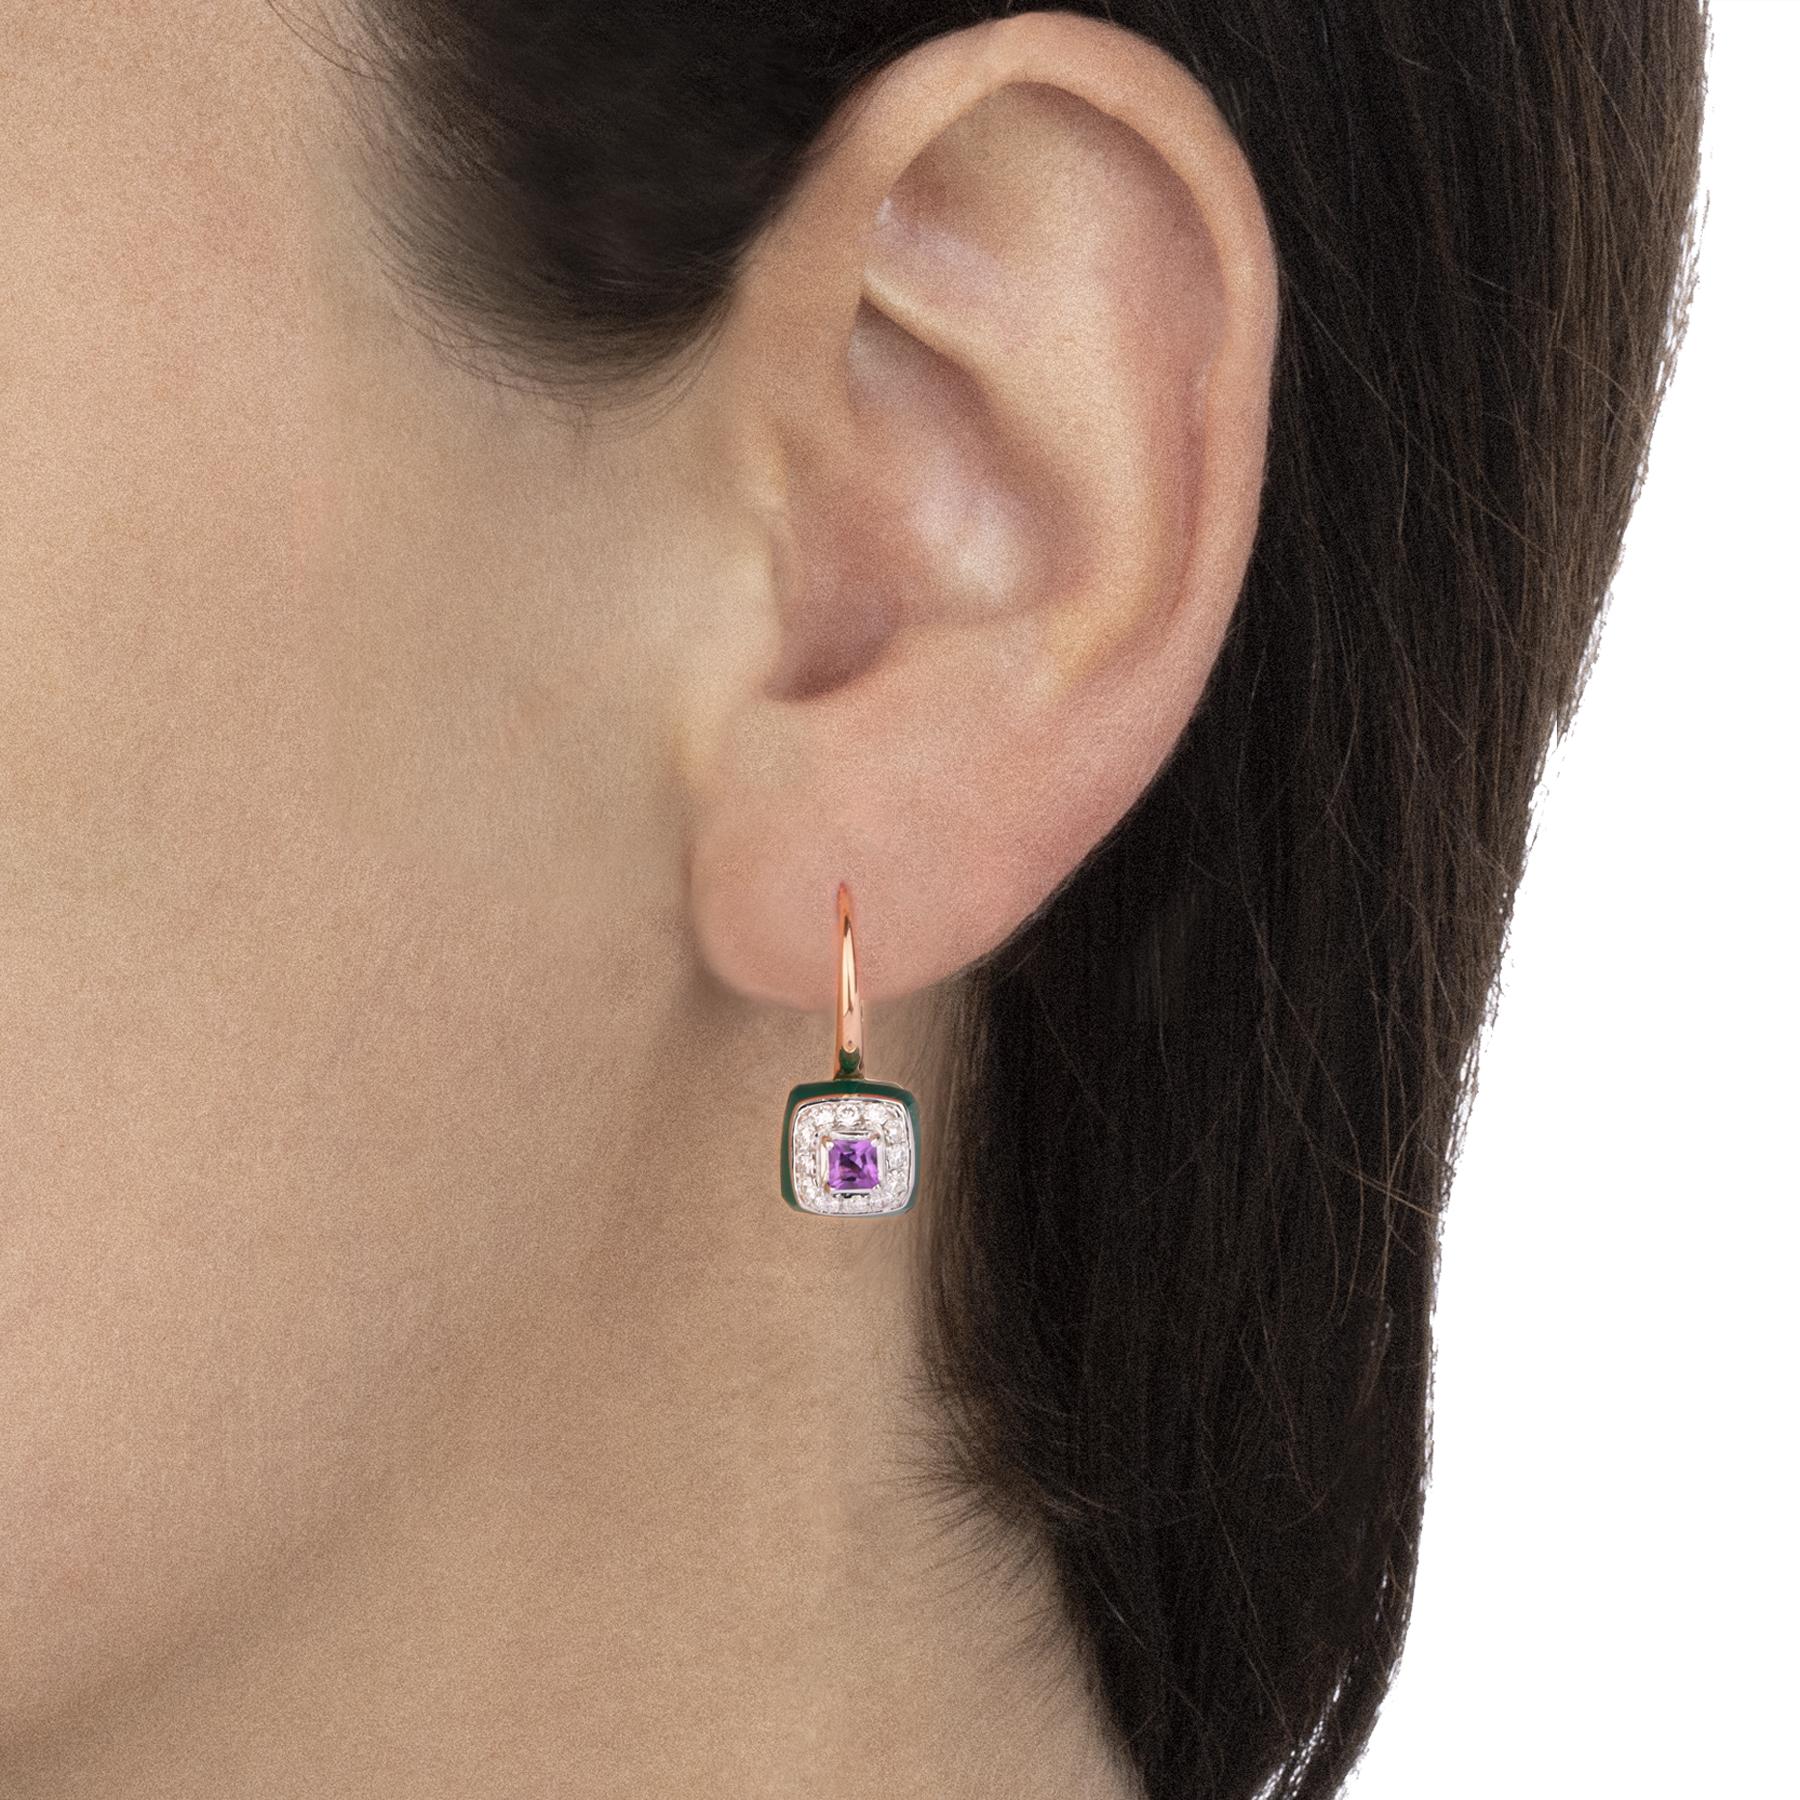 Exotic shades stones for these rose gold and diamond earrings. An elegant and fresh combination with an entirely Italian design.

Cast rose gold earrings, cushion cut green onyx 5.00 ct and white gold diamonds pavé of 0.34 ct and square cut amethyst